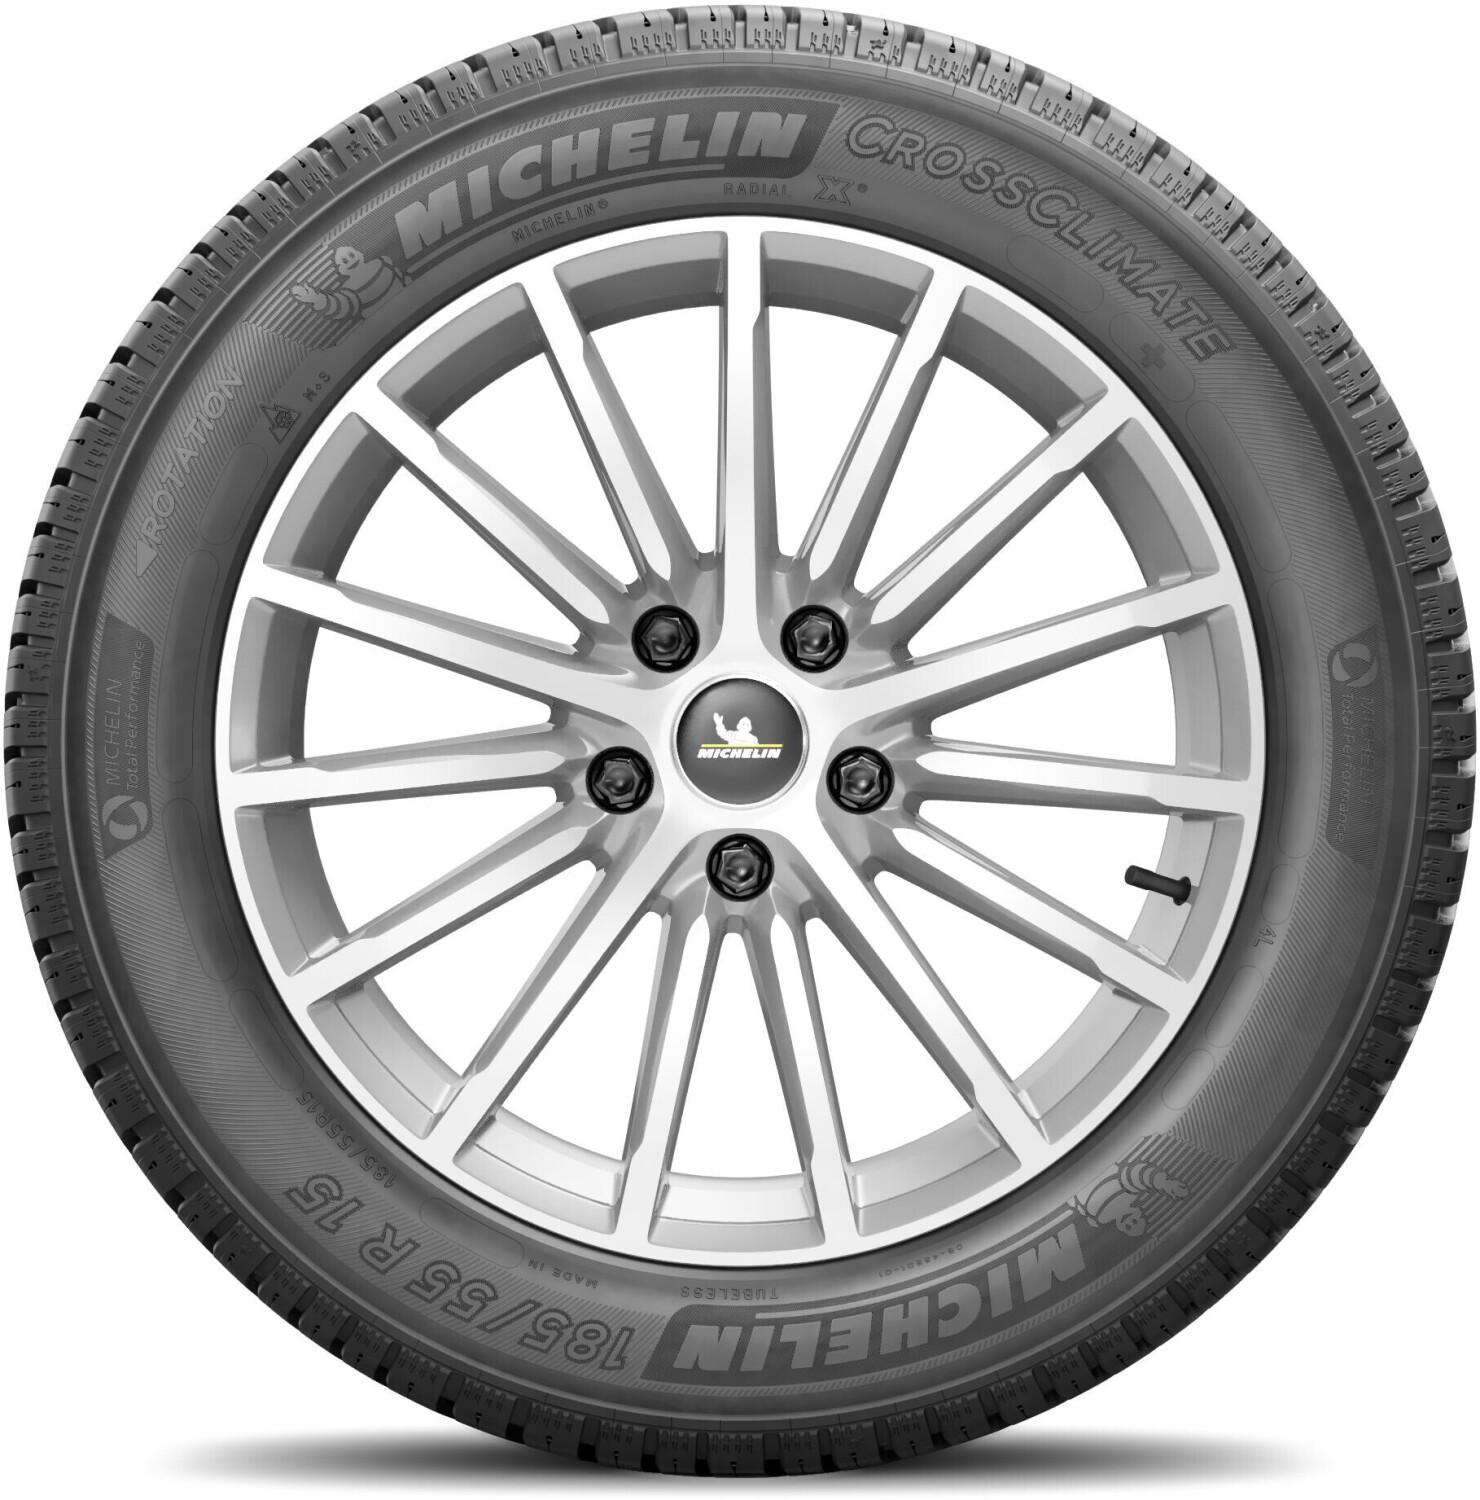 Buy Michelin CrossClimate+ 185/55 R15 86H from £124.49 (Today) – Best